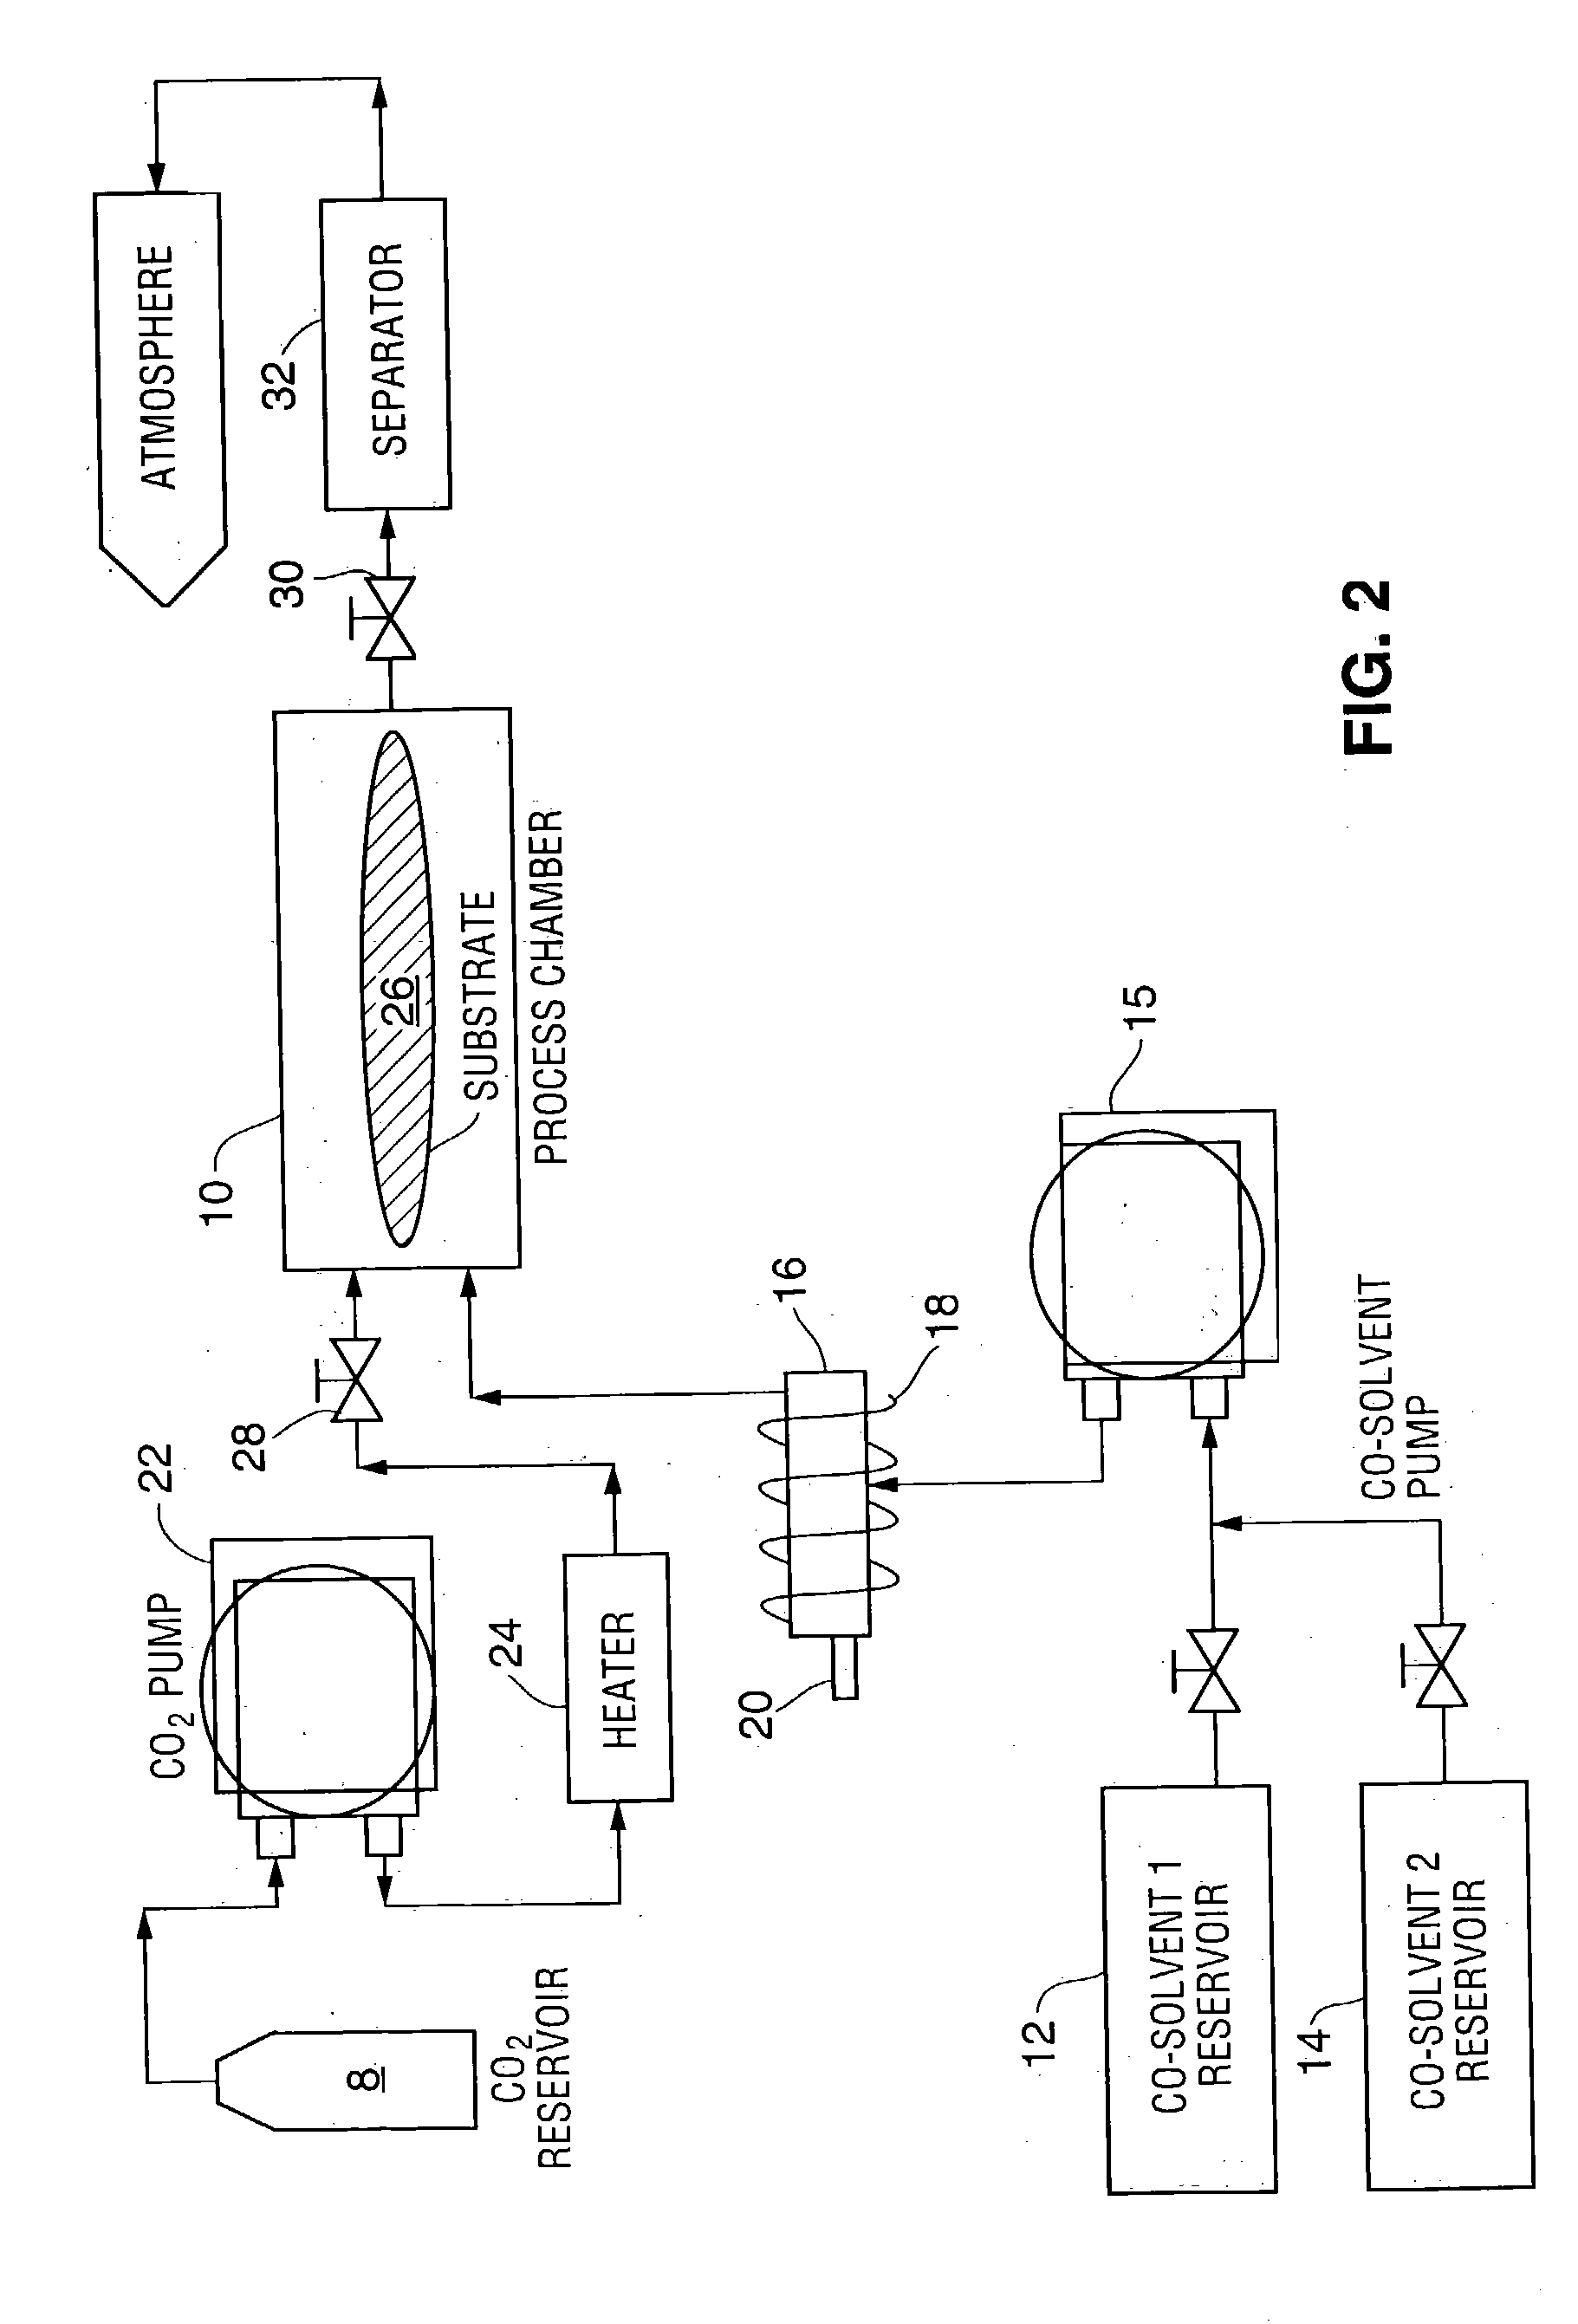 Compositions and method for removing photoresist and/or resist residue at pressures ranging from ambient to supercritical